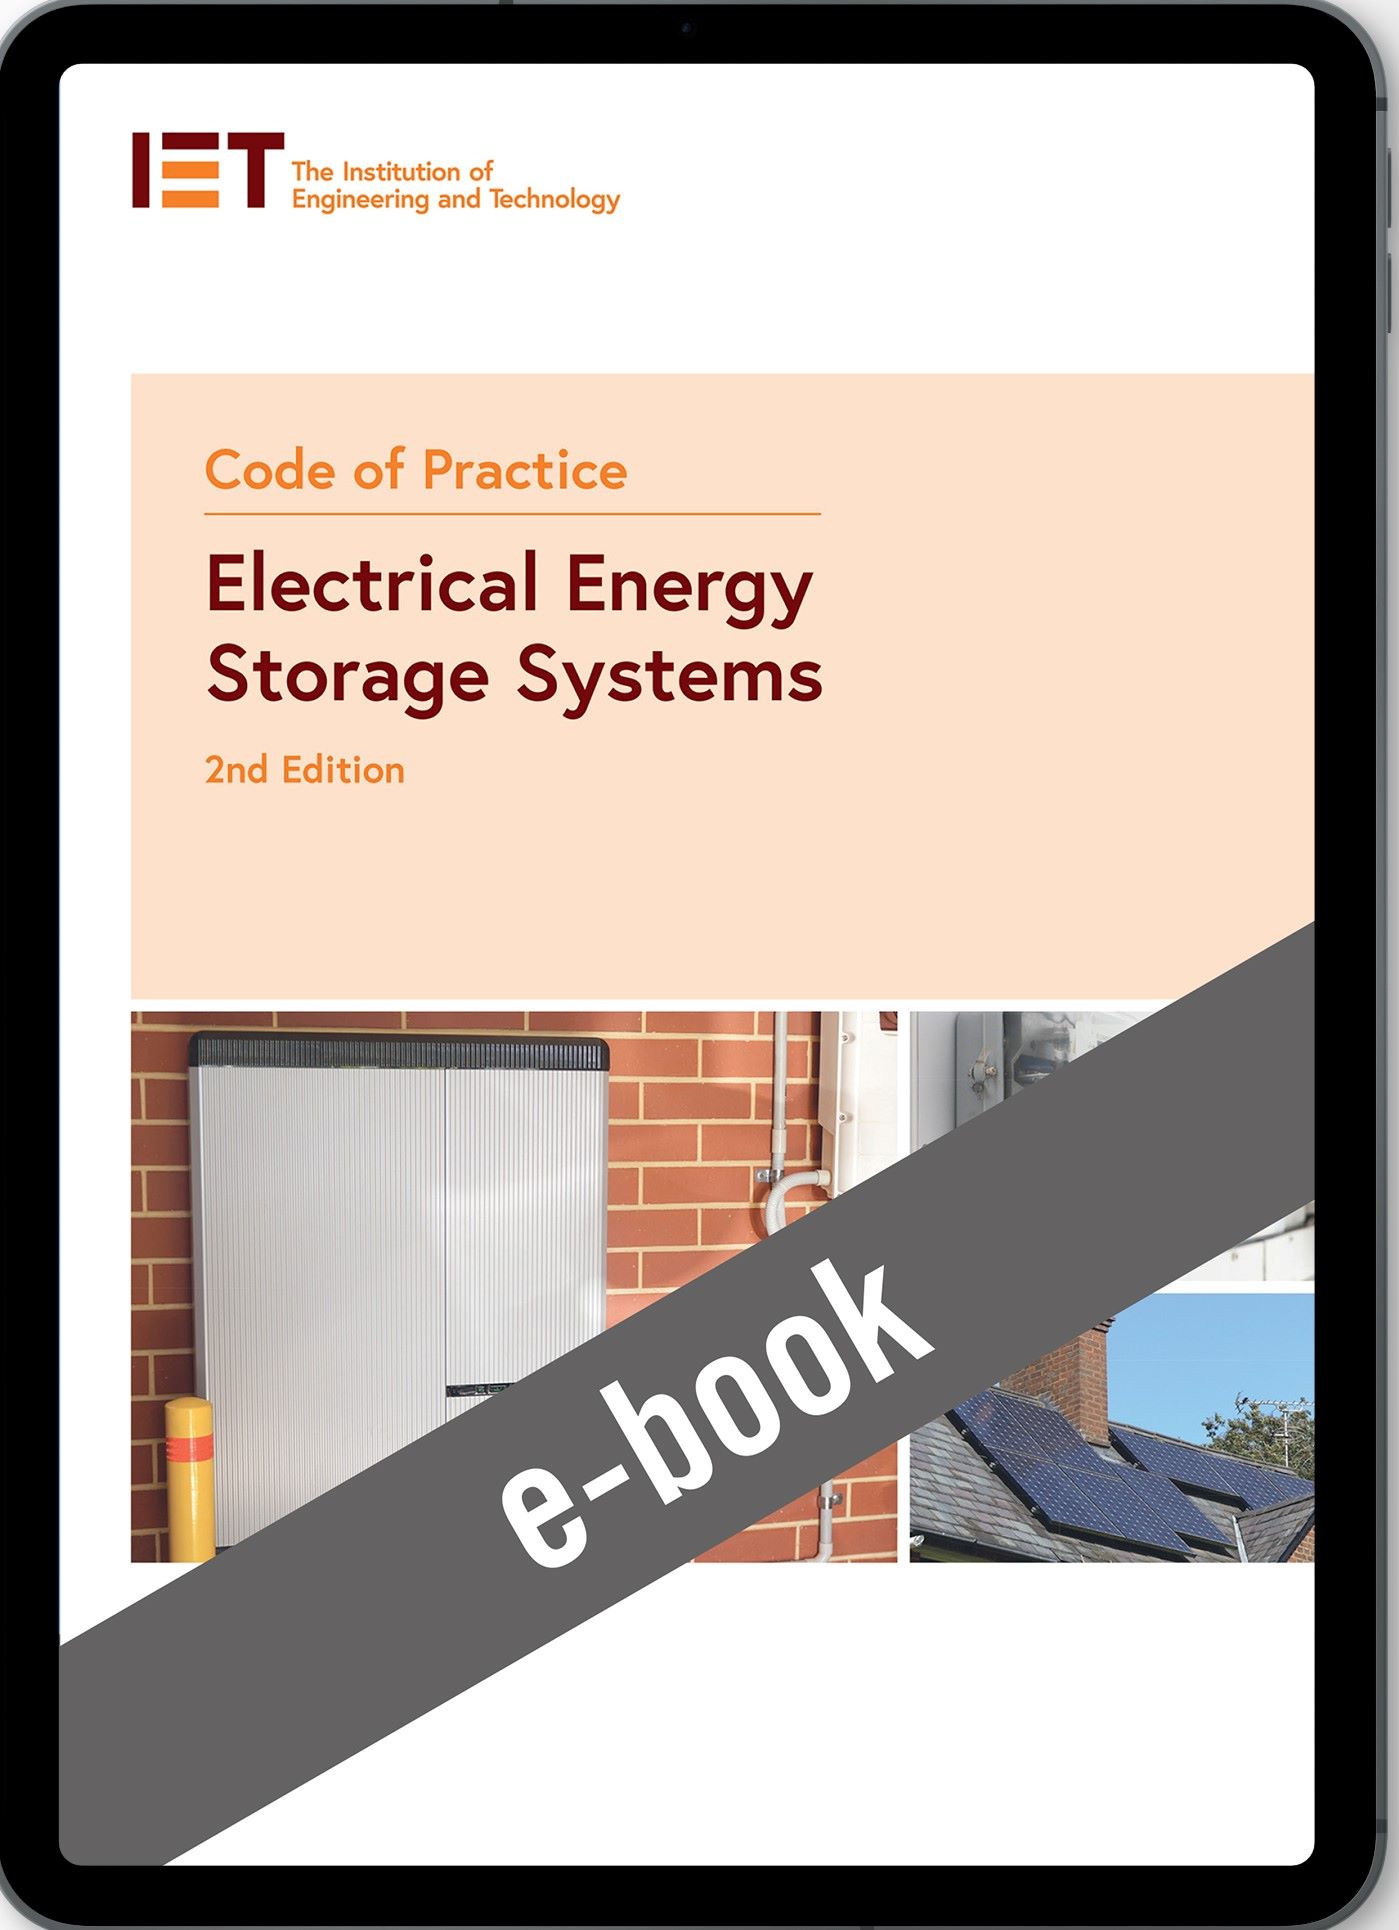 Code of Practice for Electrical Energy Storage Systems, 2nd Edition (VS)